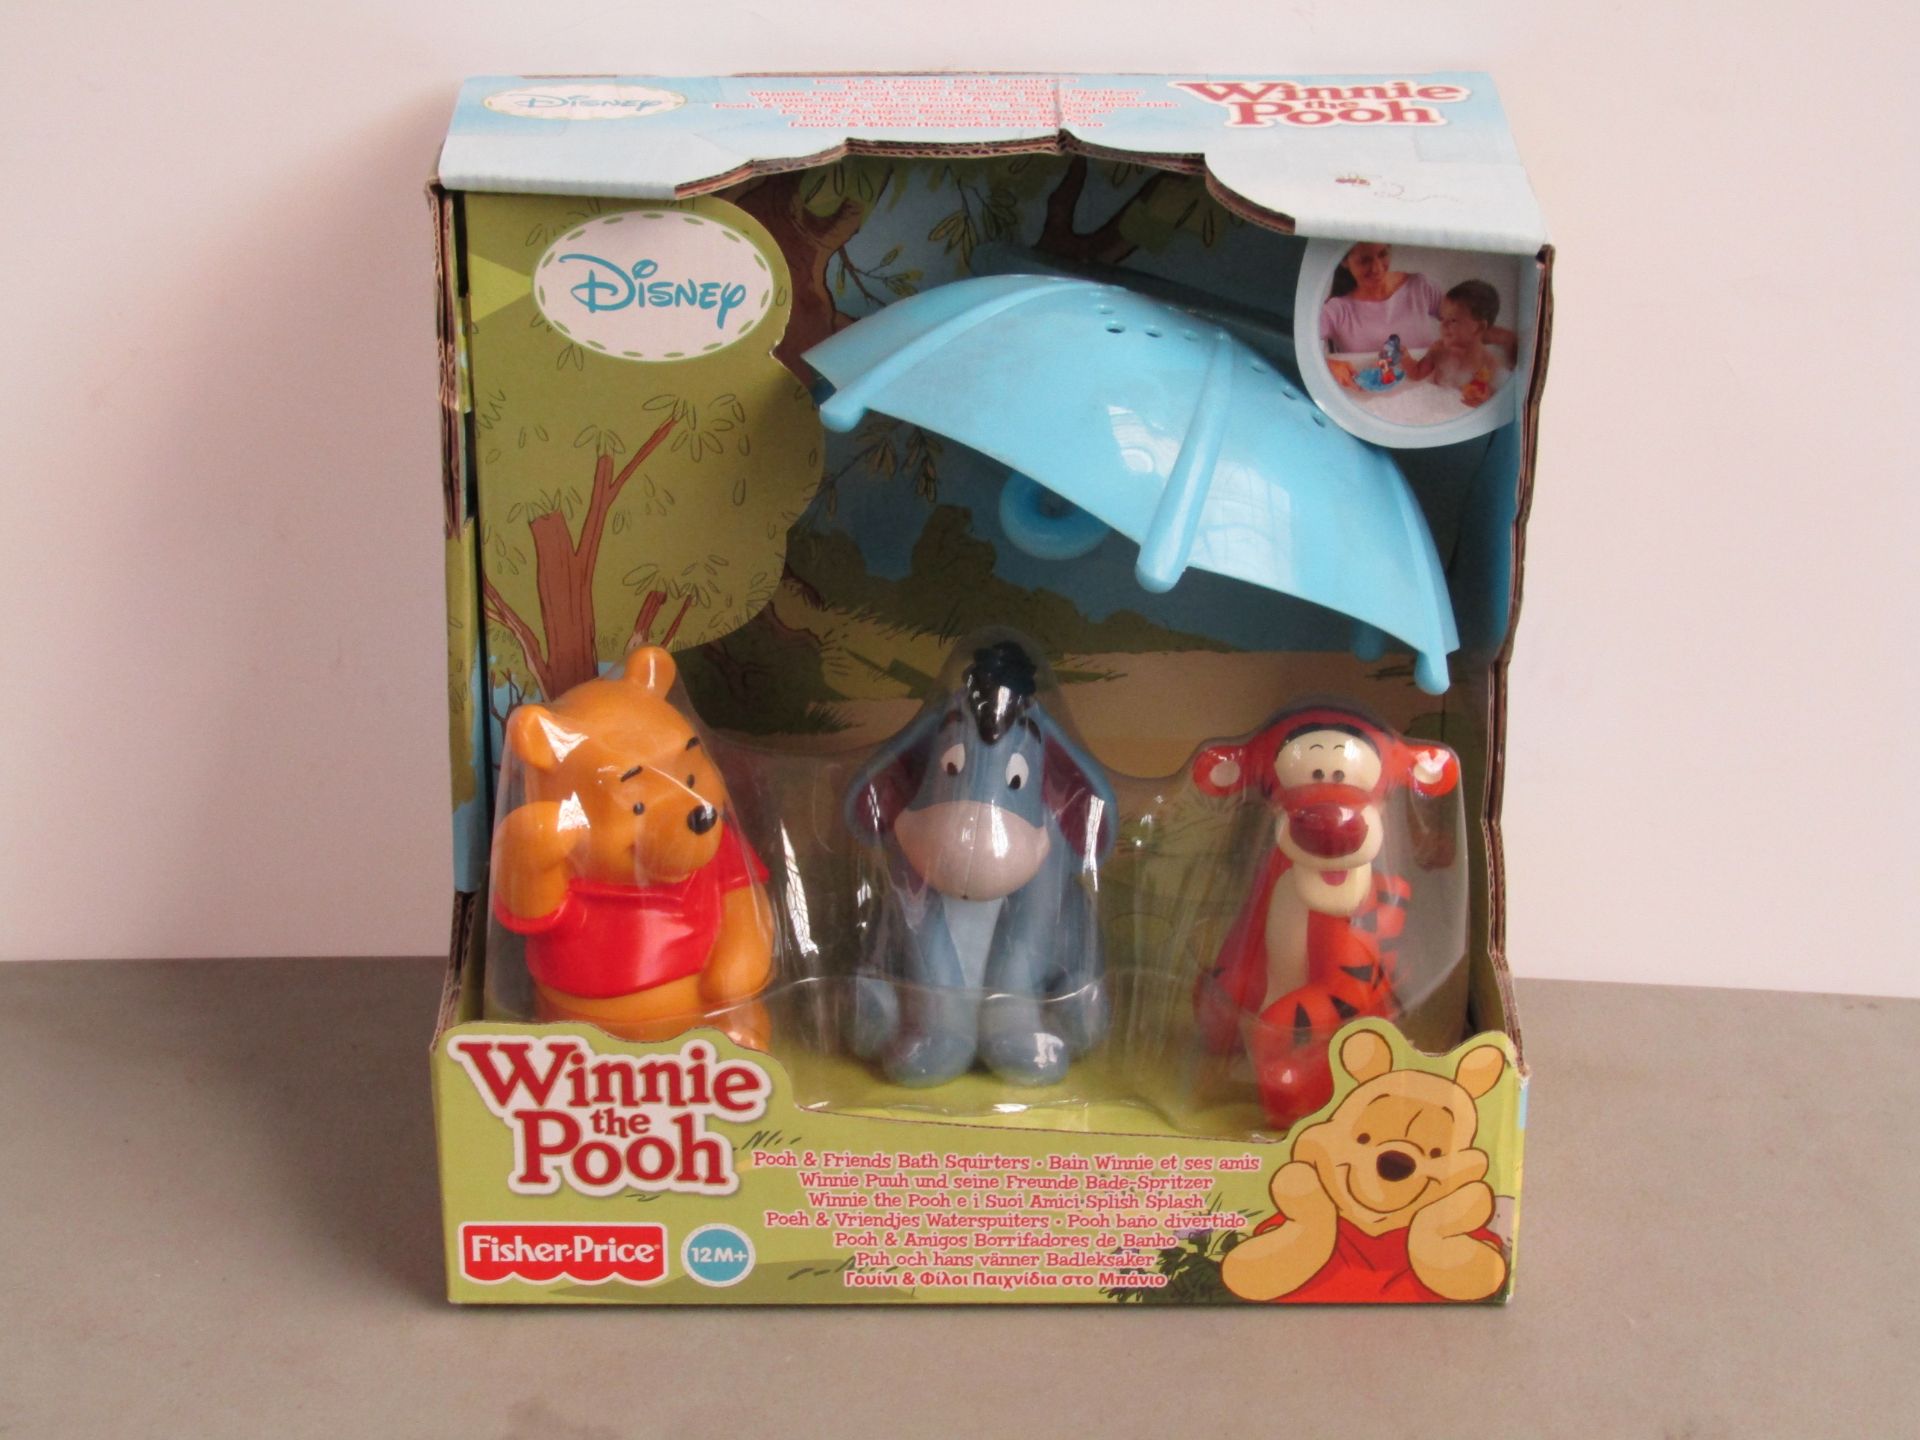 Fischer-Price Winnie the Pooh & Friends Bath Squirters. New & Boxed.